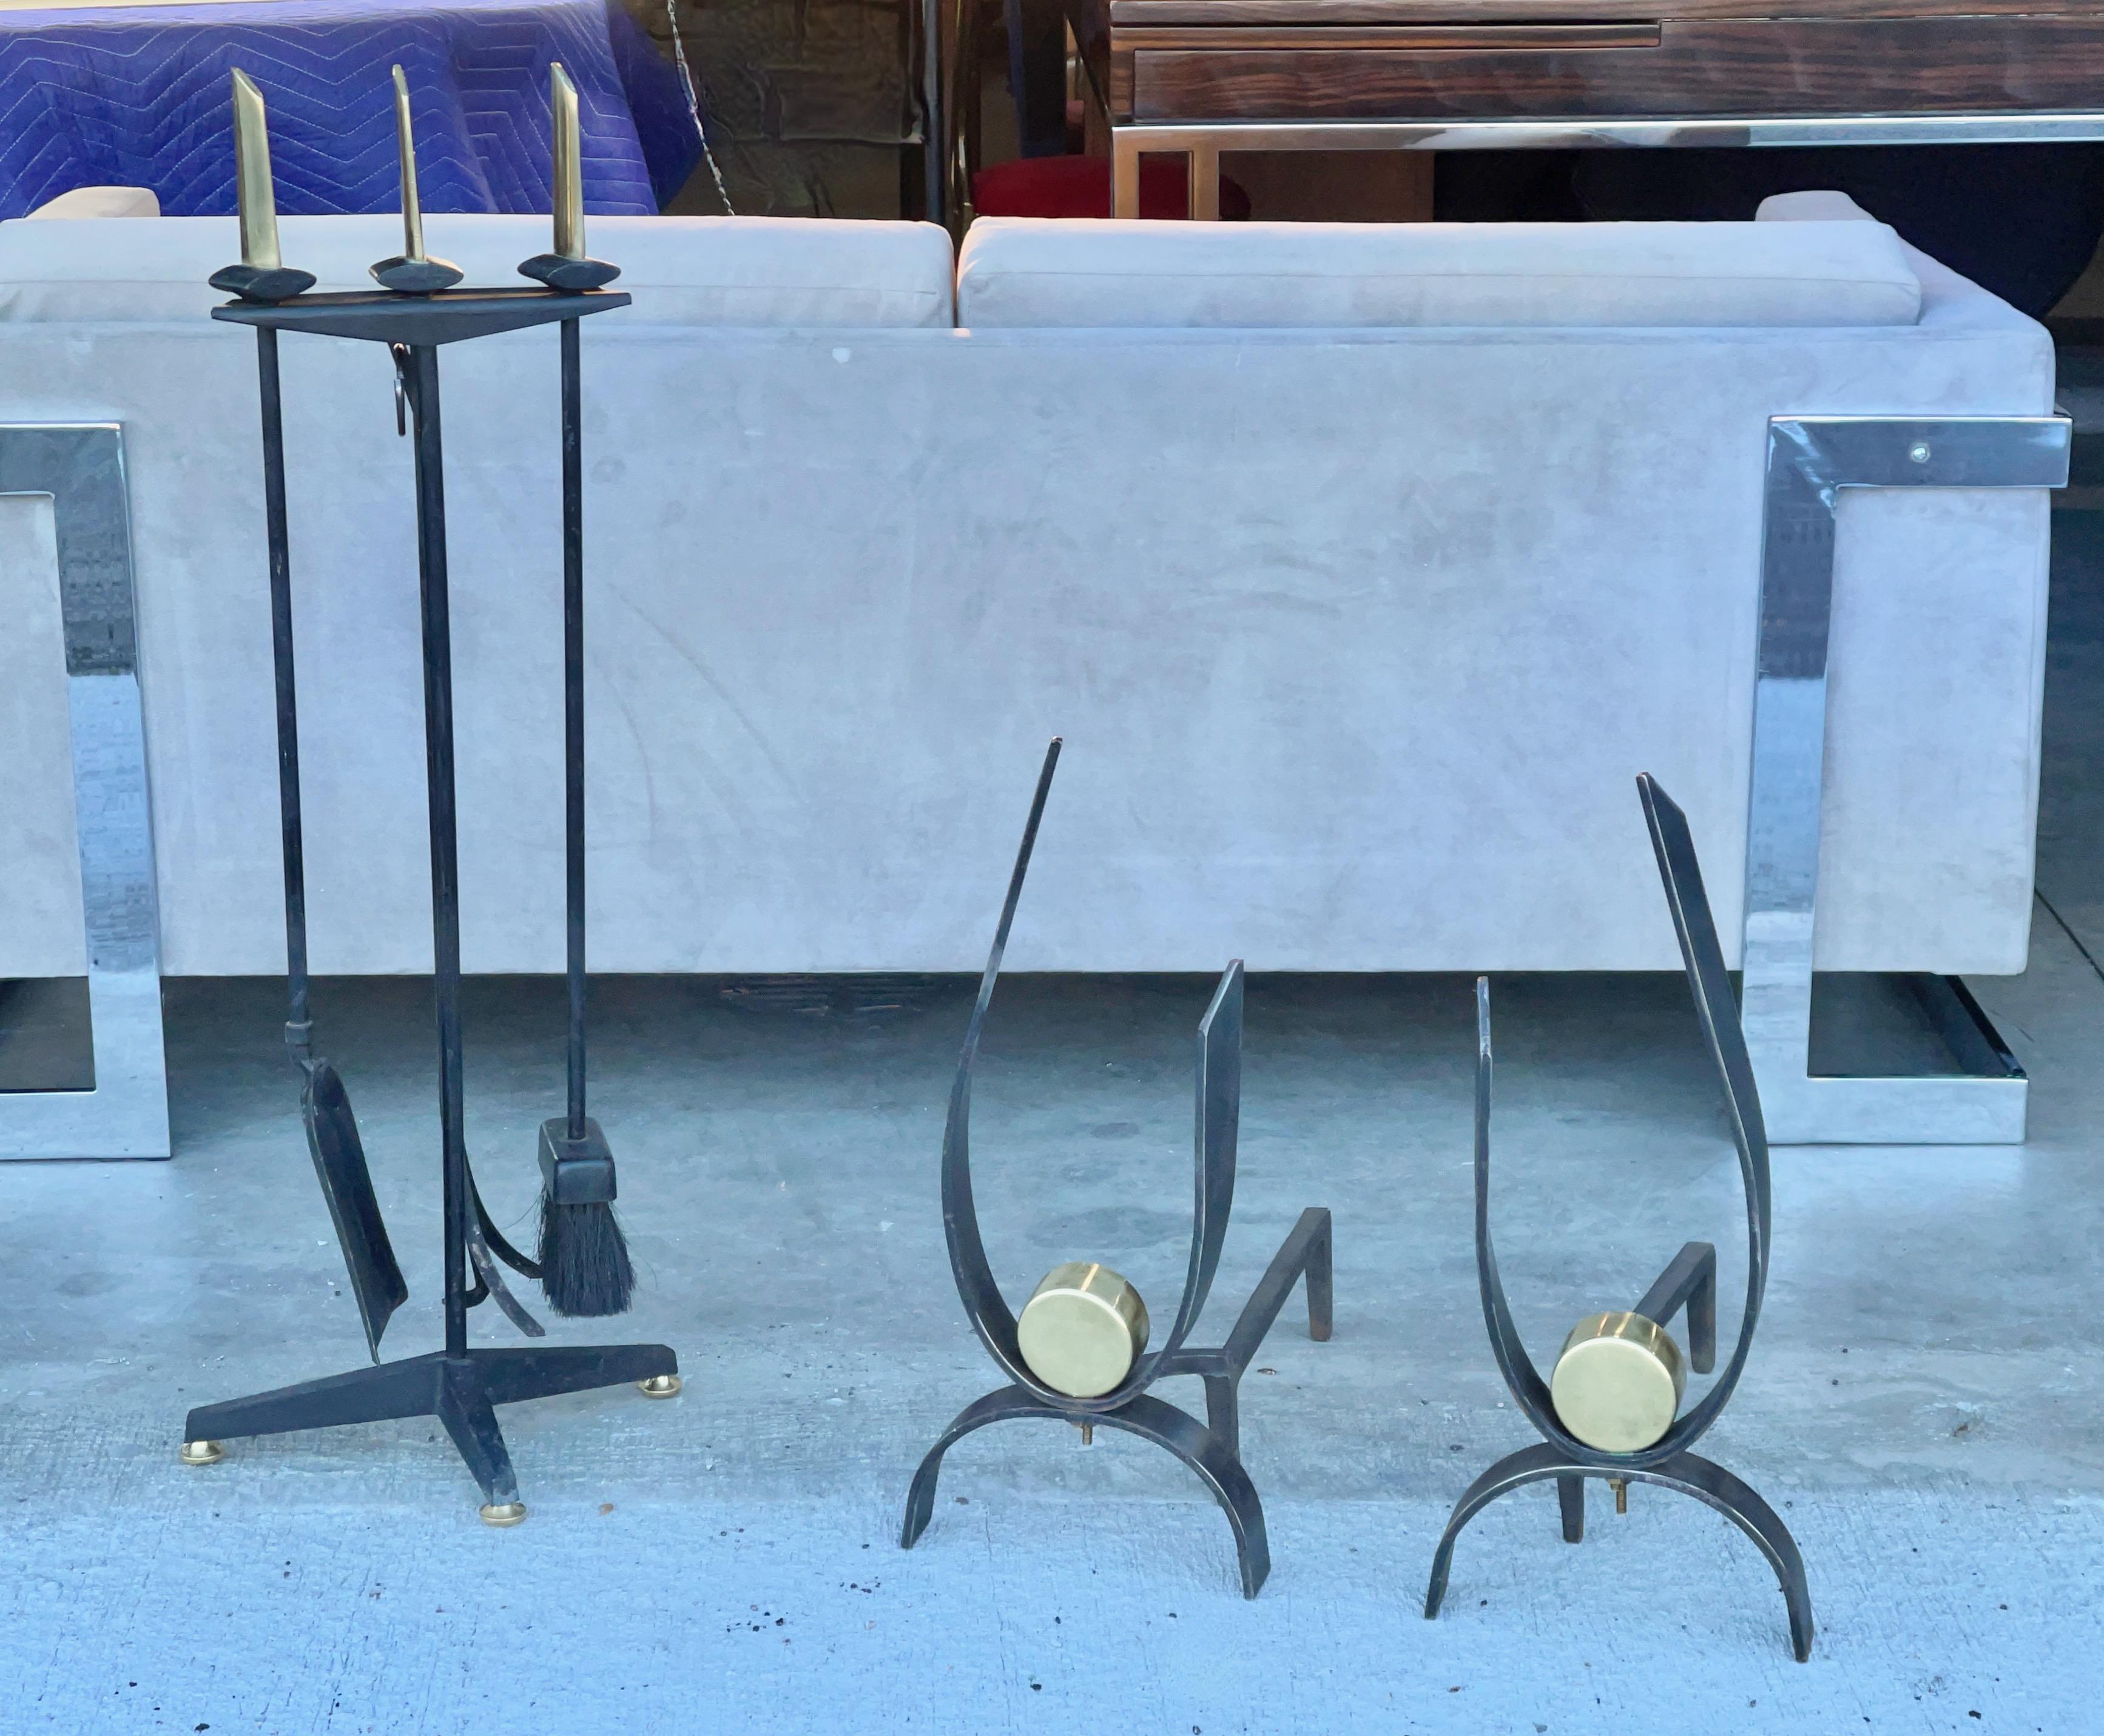 An original 4 piece set of modernist Art Deco fireside tools designed by Donald Deskey. Sculptural hefty brass handles on the broom, shovel and claw poker. The three tools rest in a standing bracket on tripod base with brass feet. Deskey's design